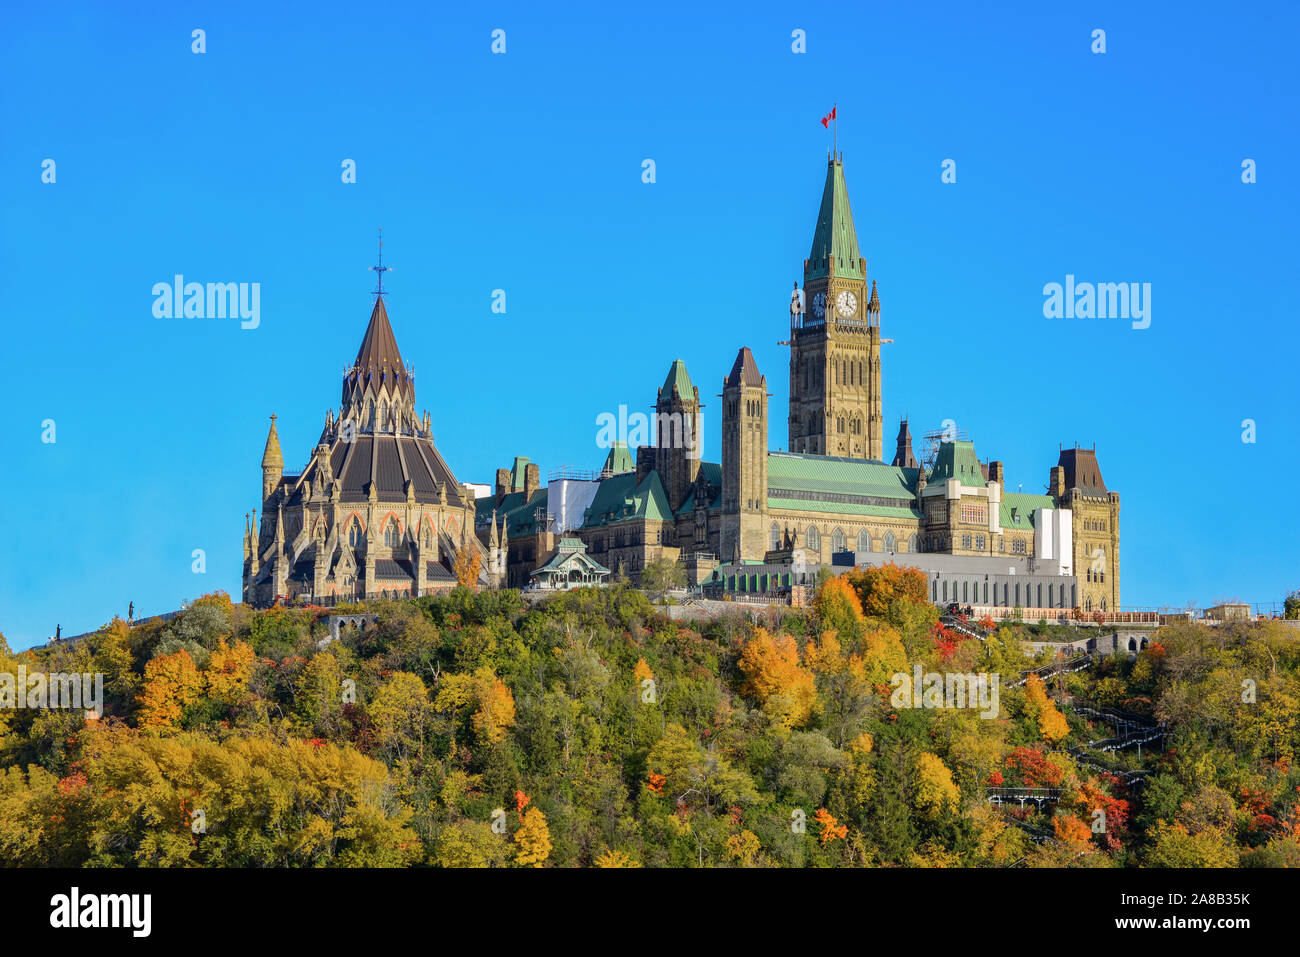 Parliament of Canada Stock Photo